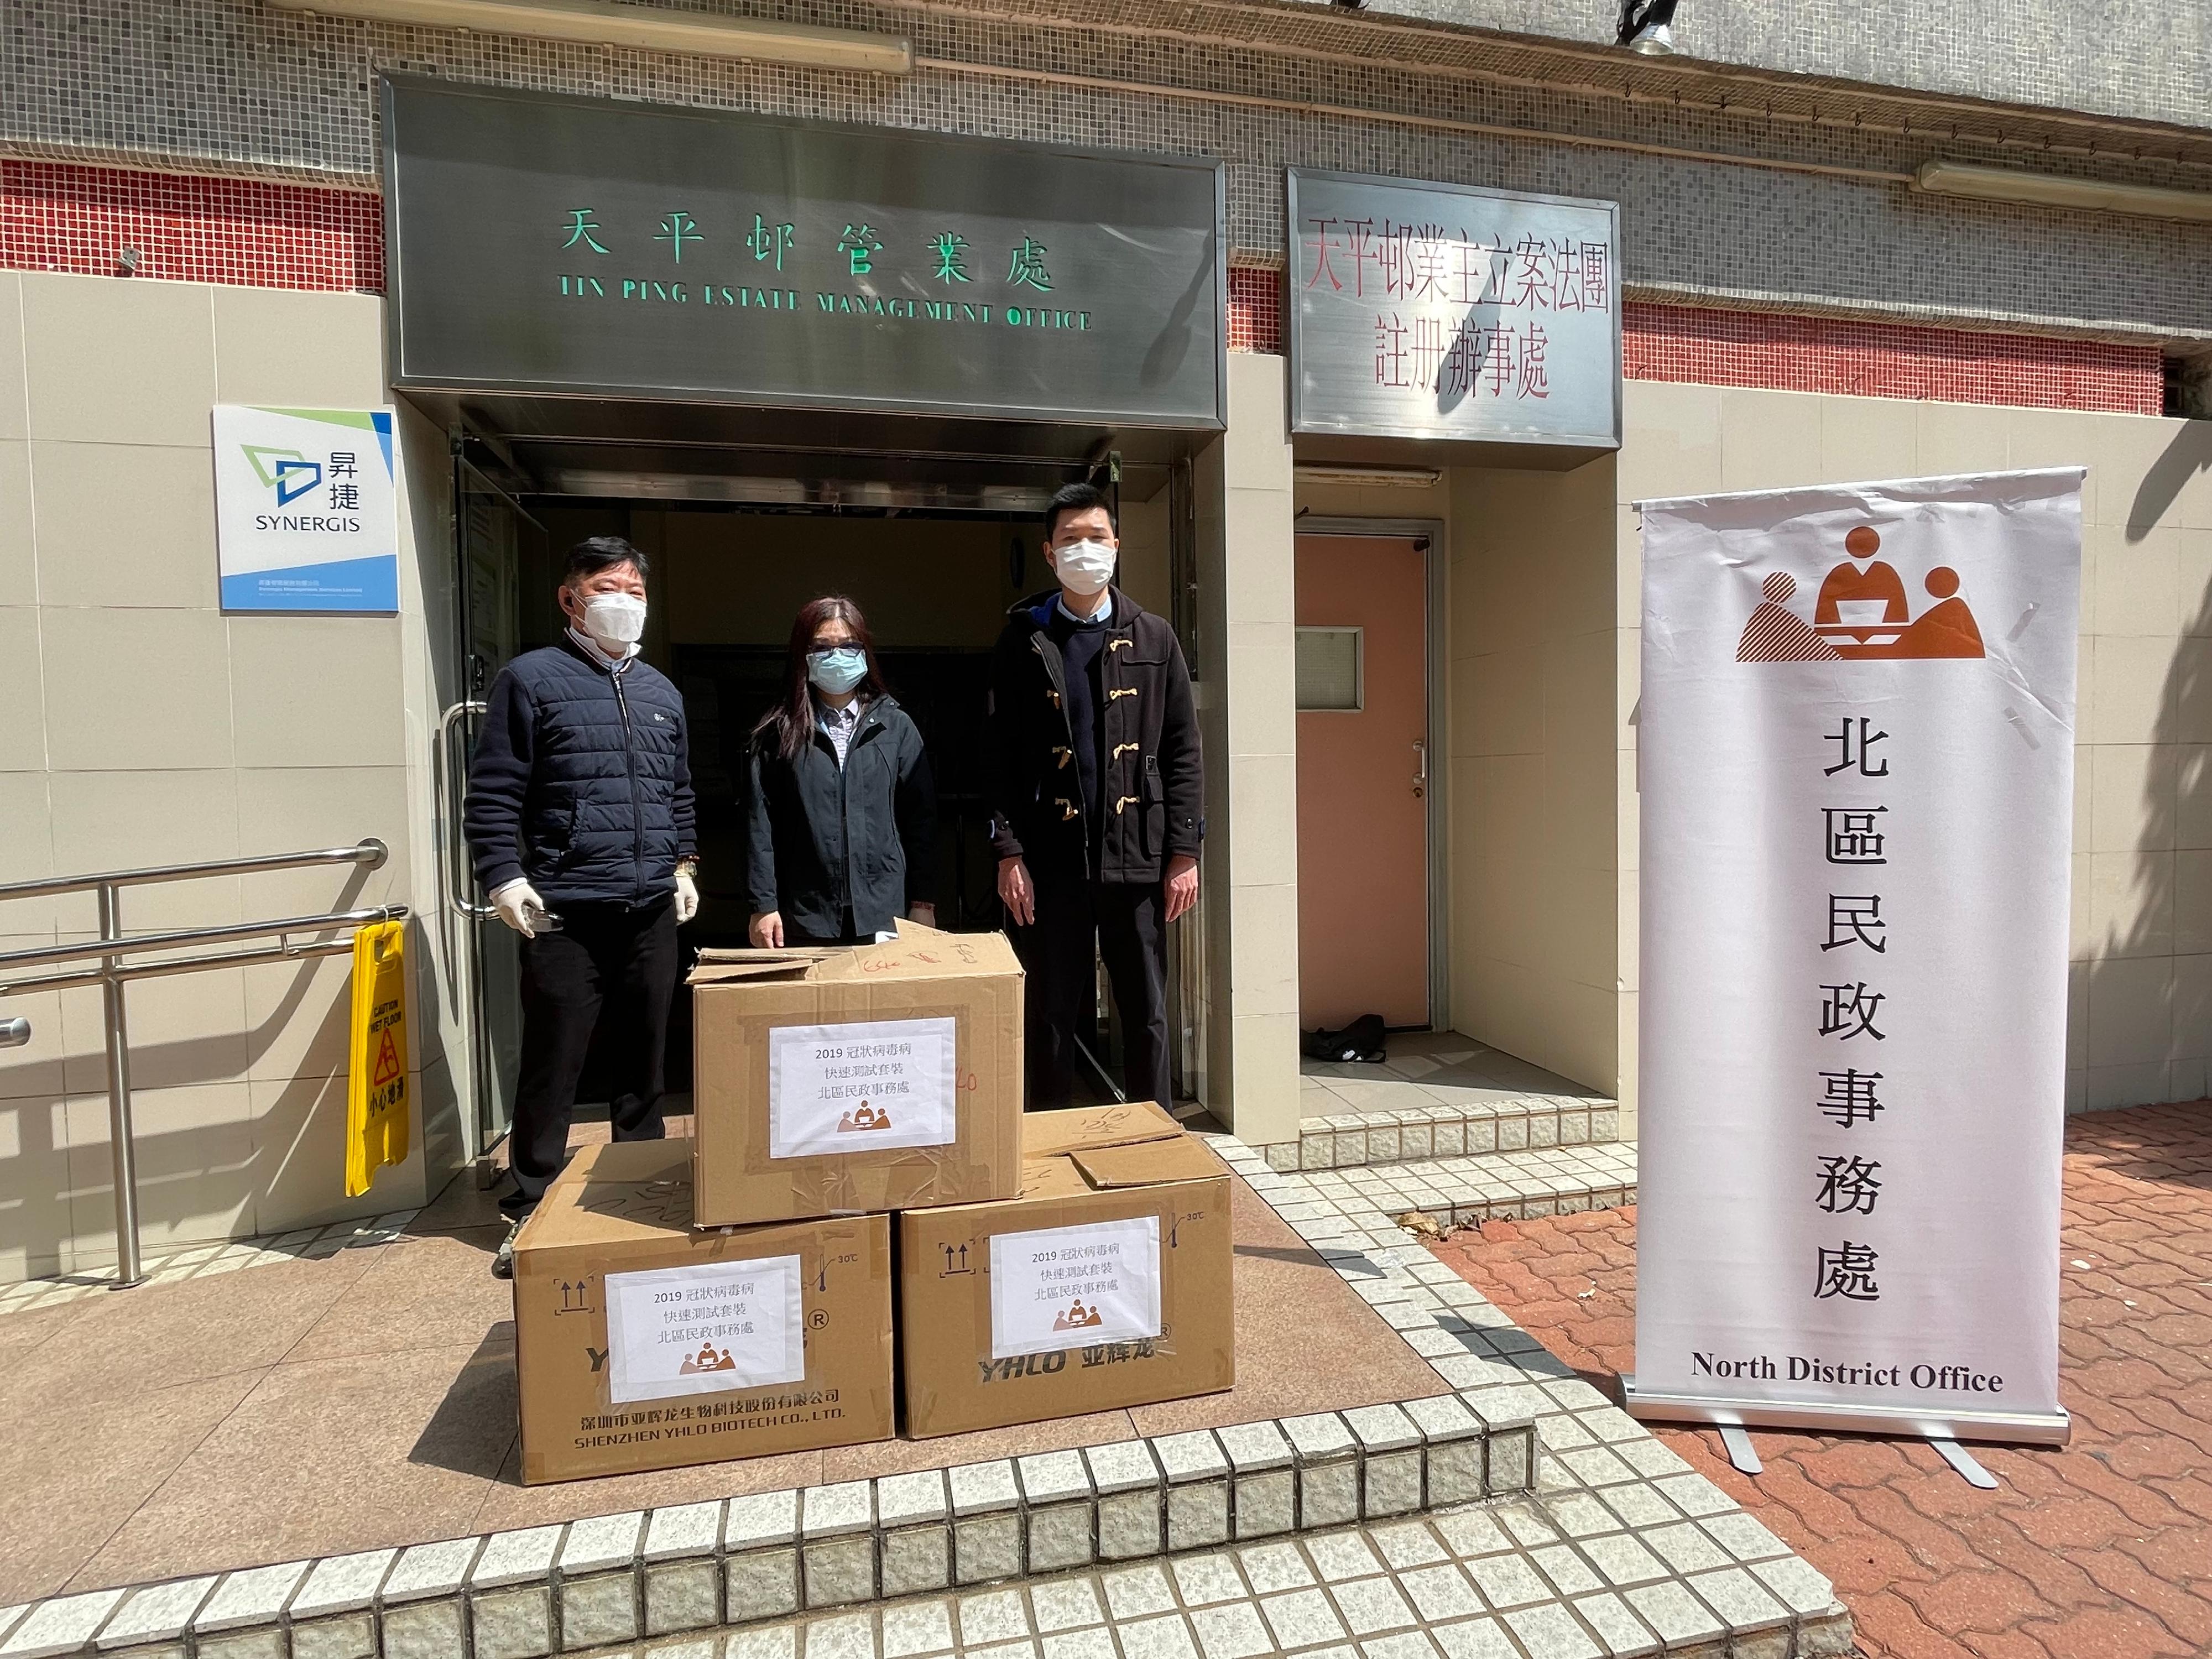 The North District Office today (February 25) distributed rapid test kits to households, cleansing workers and property management staff living and working in Tin Hee House of Tin Ping Estate, Sheung Shui for voluntary testing through the Estate's Management Office.